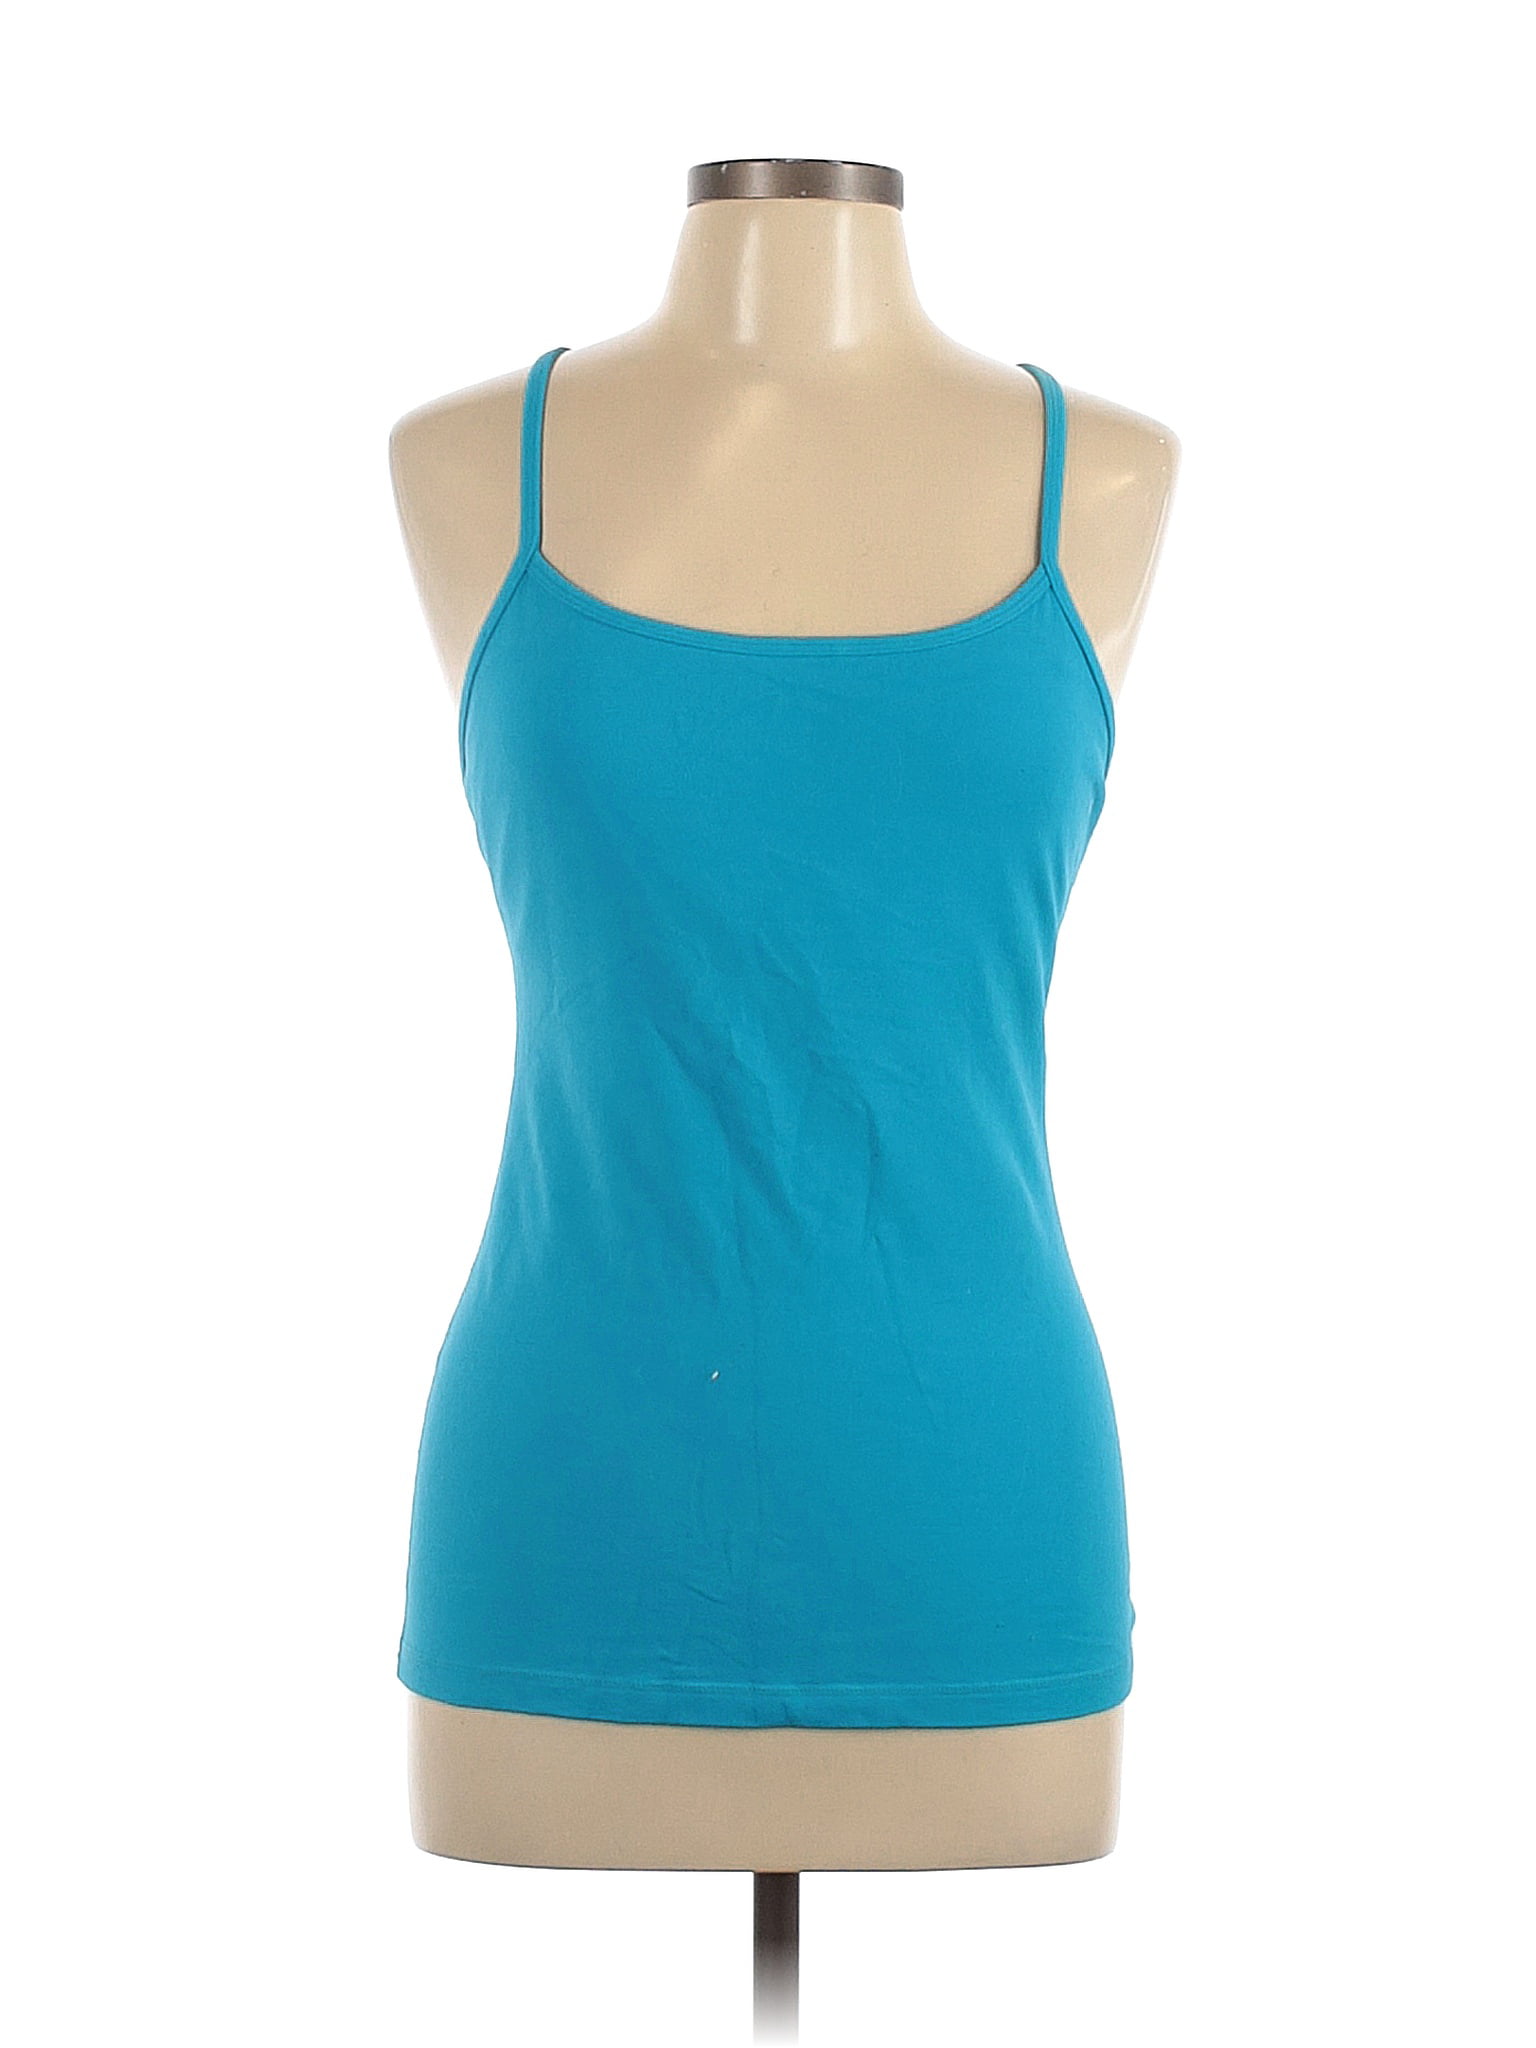 Pre-Owned Lululemon Athletica Womens Size 10 Active Maldives